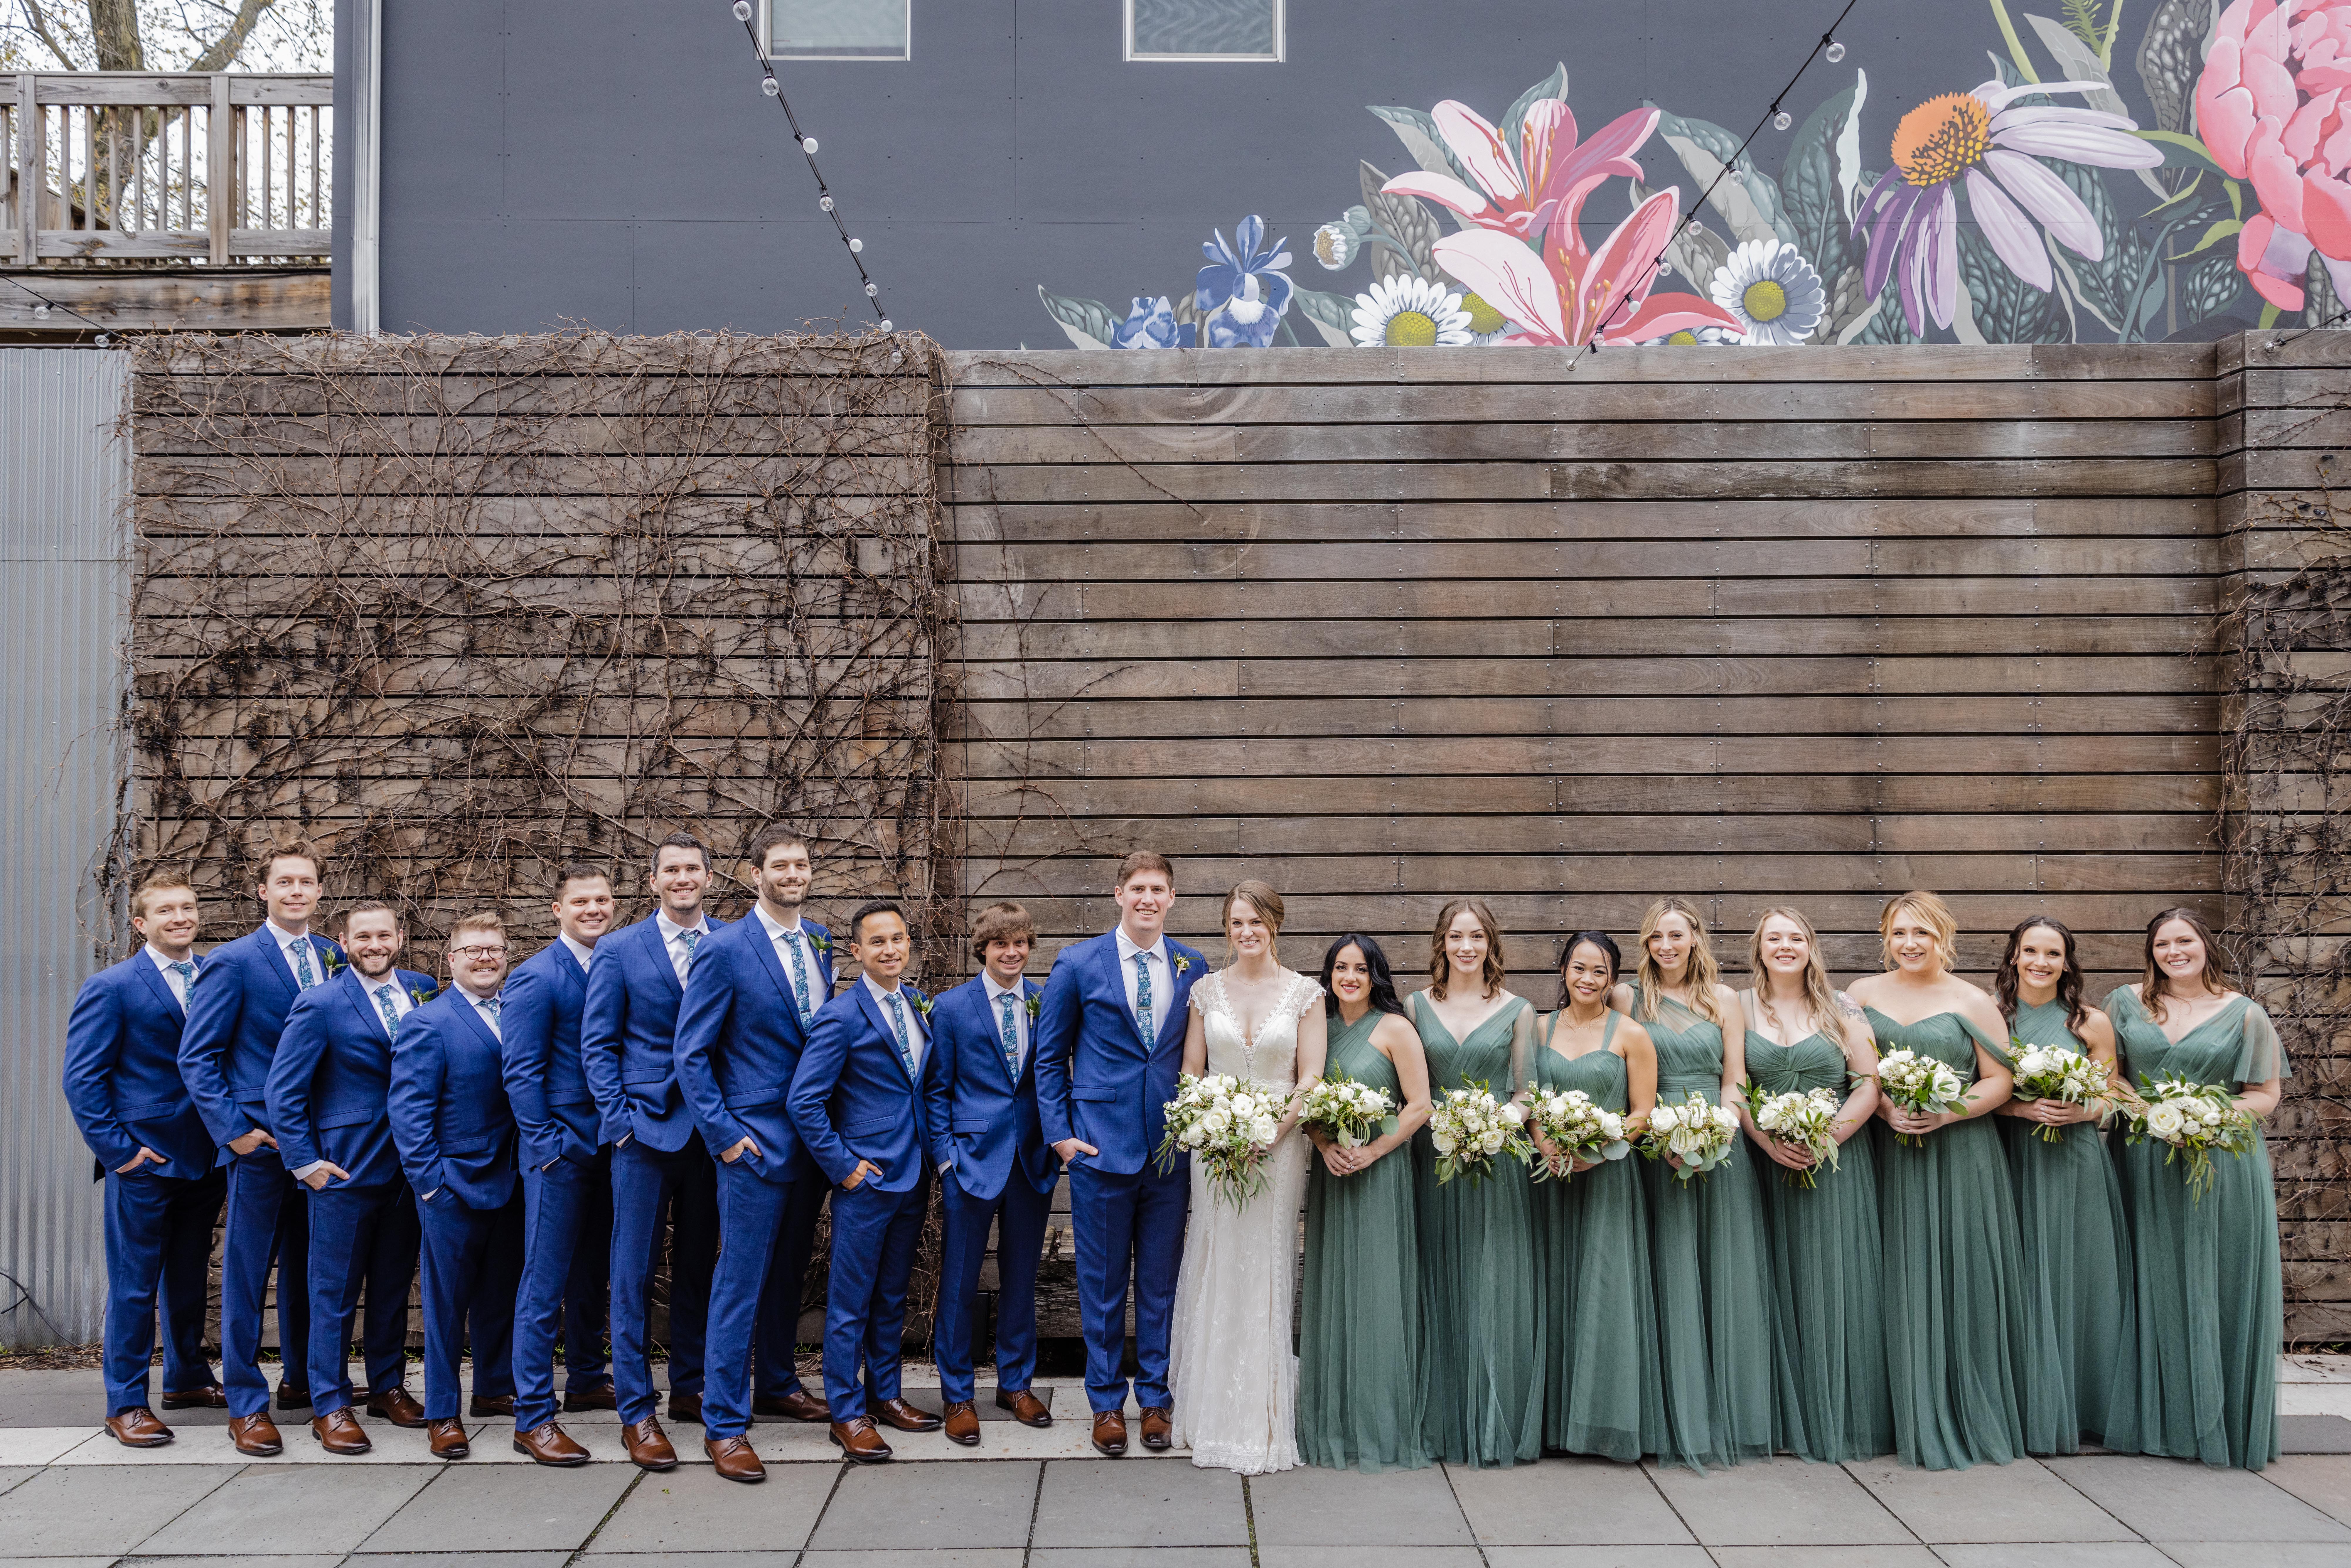 Full wedding party standing together in the joinery courtyard